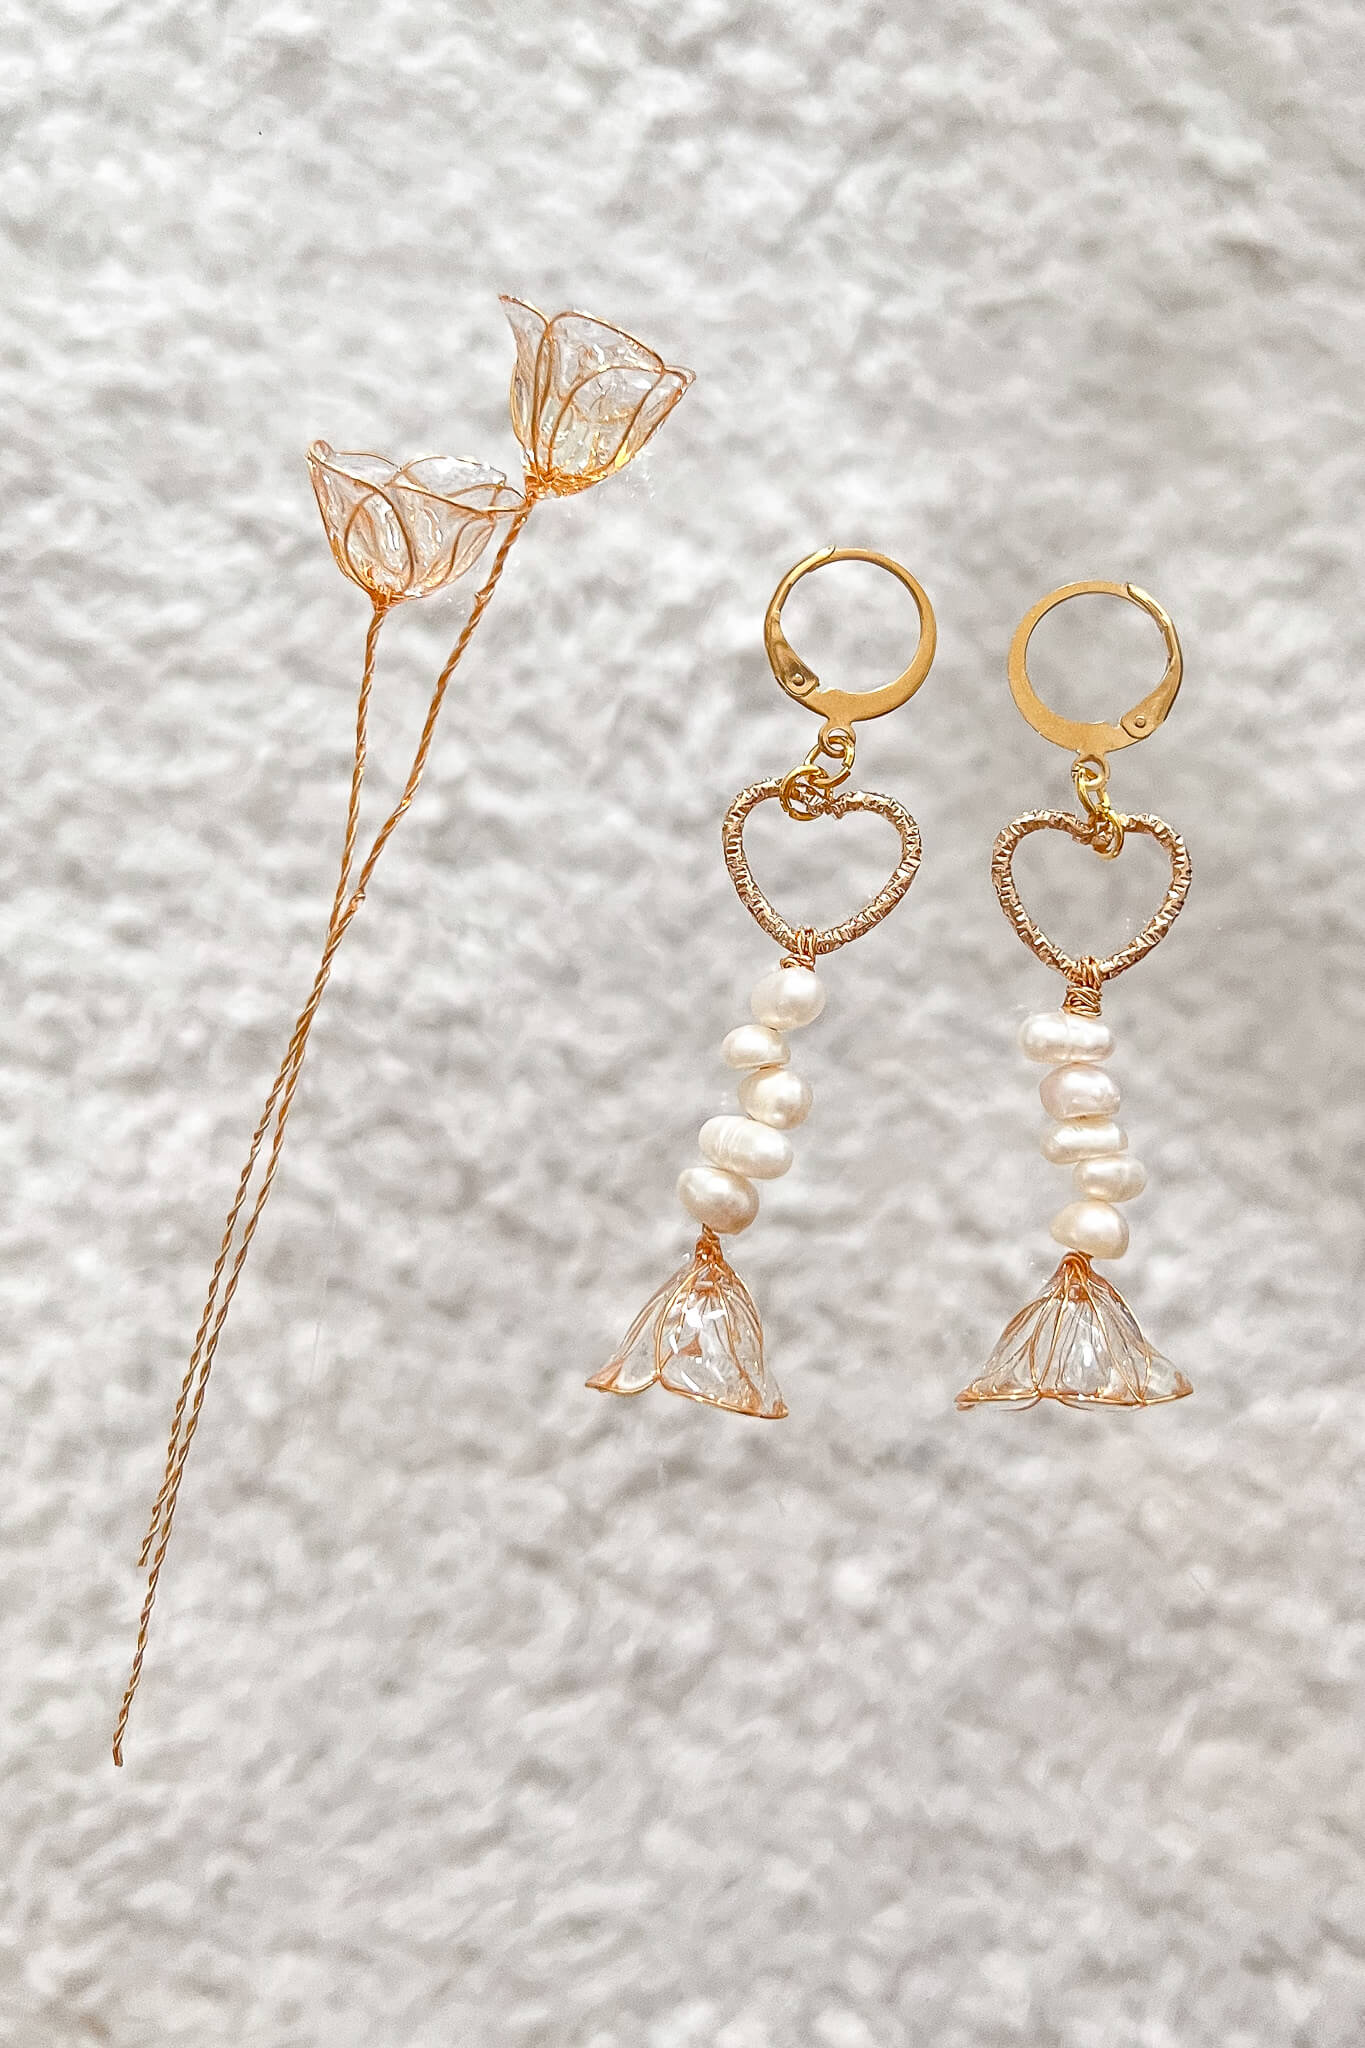 Heart shape Huggie Hoops with wire resin flower earrings and baroque pearls. rose gold 